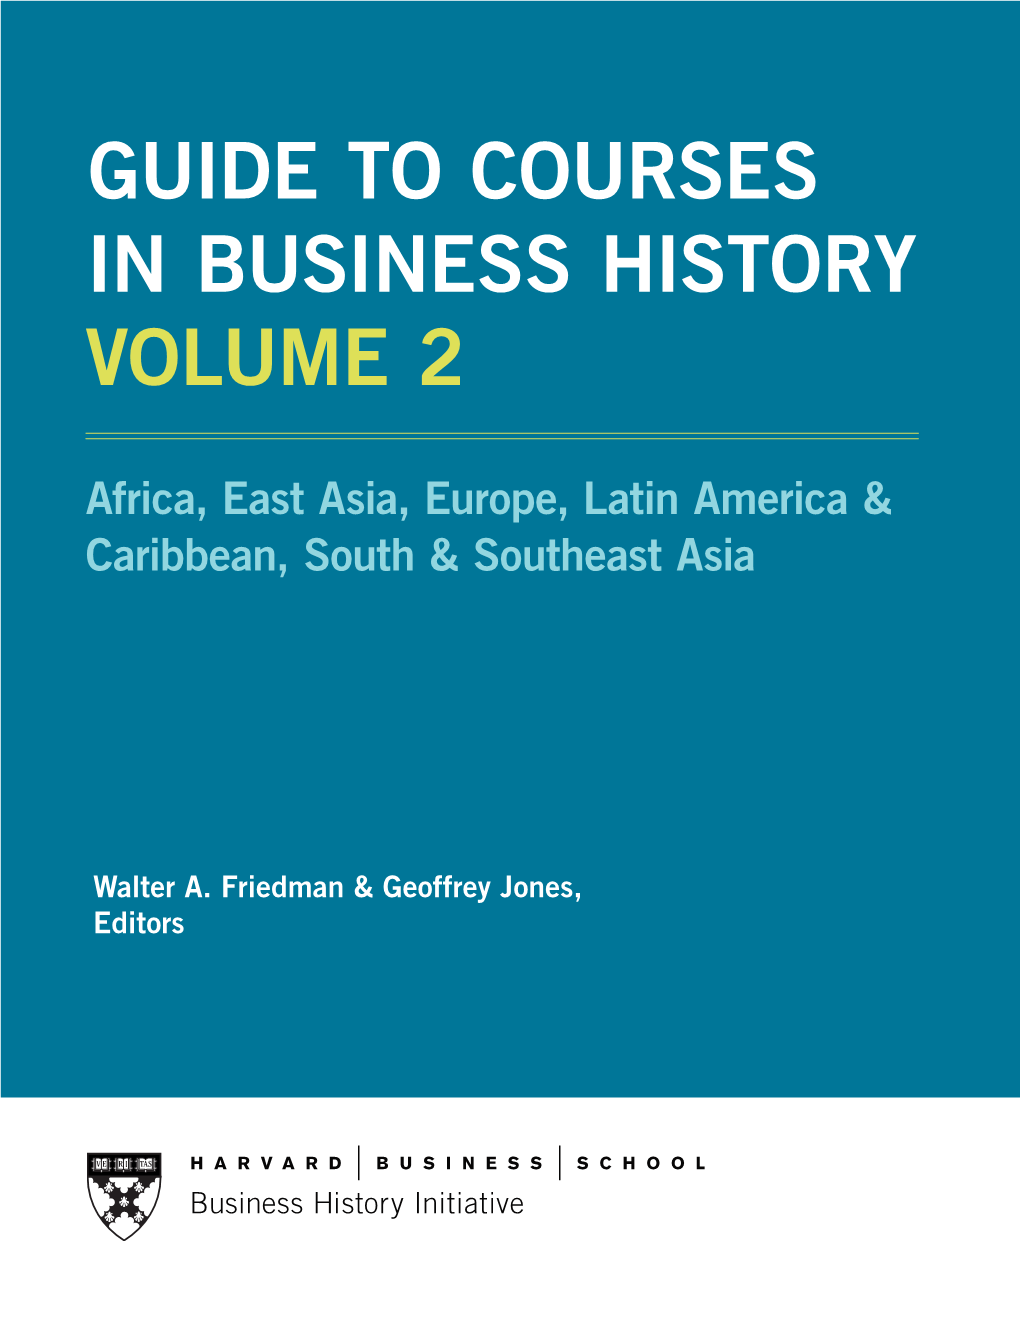 Guide to Courses in Business History Volume 2